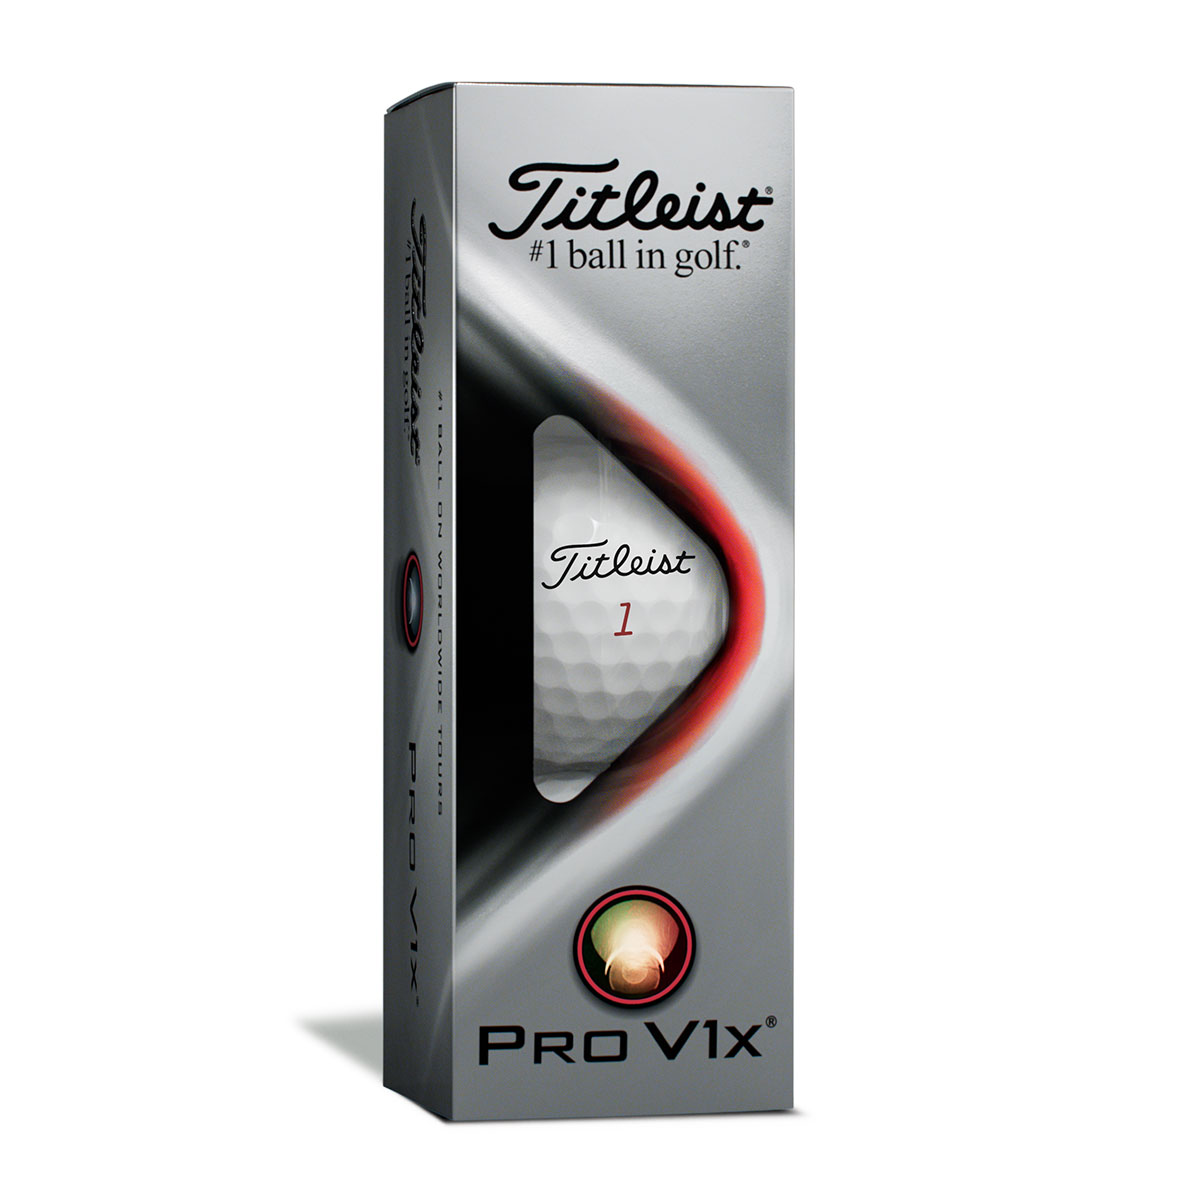 Titleist Pro V1x 12 Golf Ball Pack from american golf